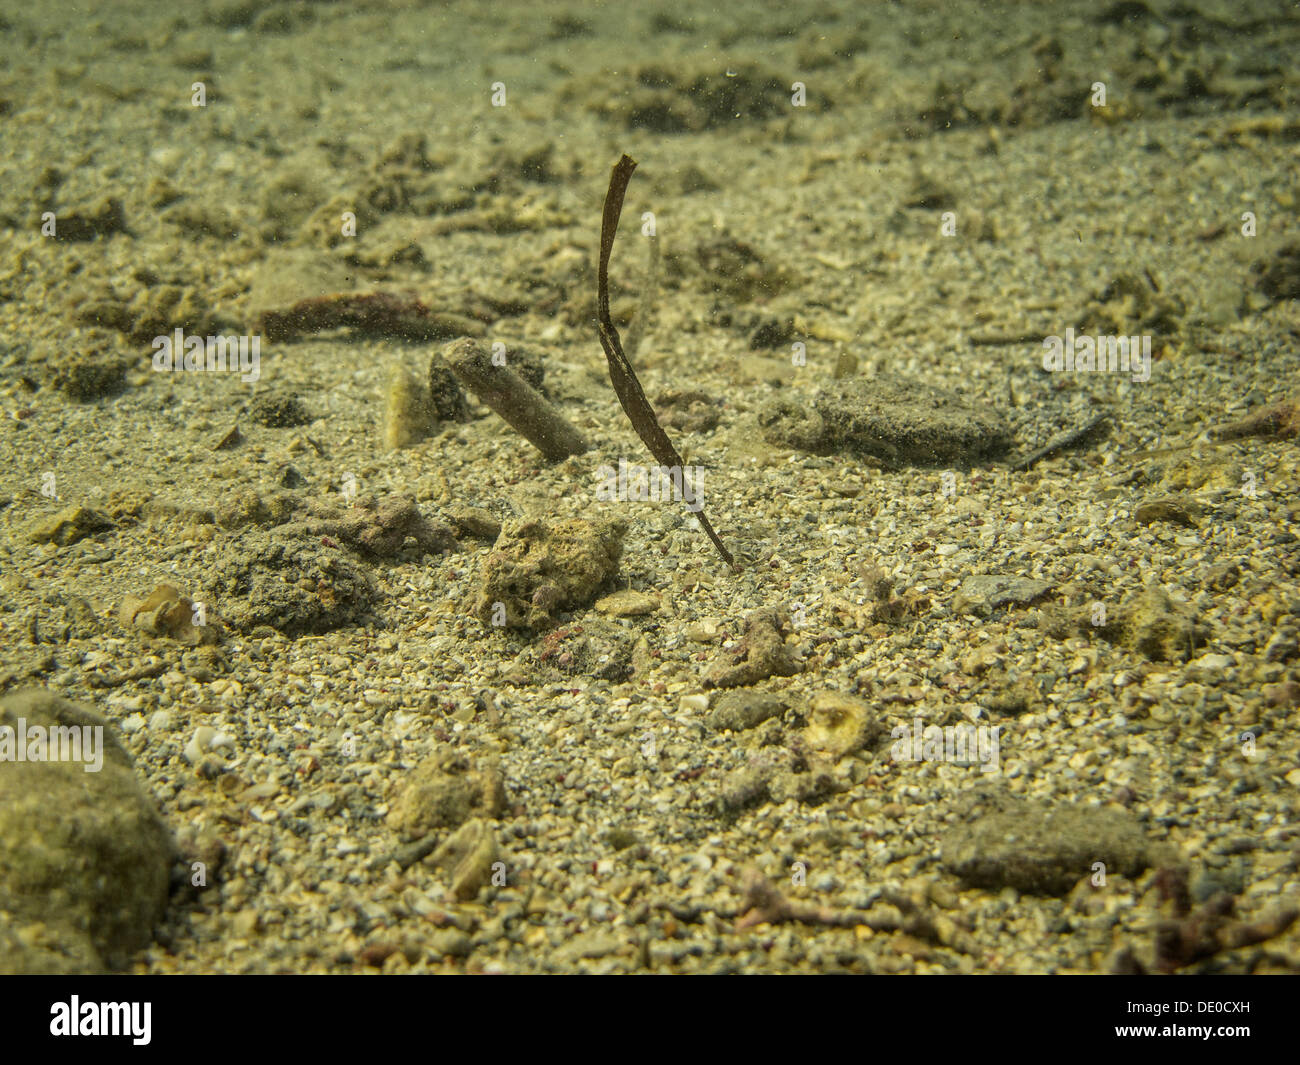 Robust Ghostpipefish or Blue-finned Ghost Pipefish (Solenostomus cyanopterus), on a seagrass bed, Mangrove Bay, Red Sea, Egypt Stock Photo